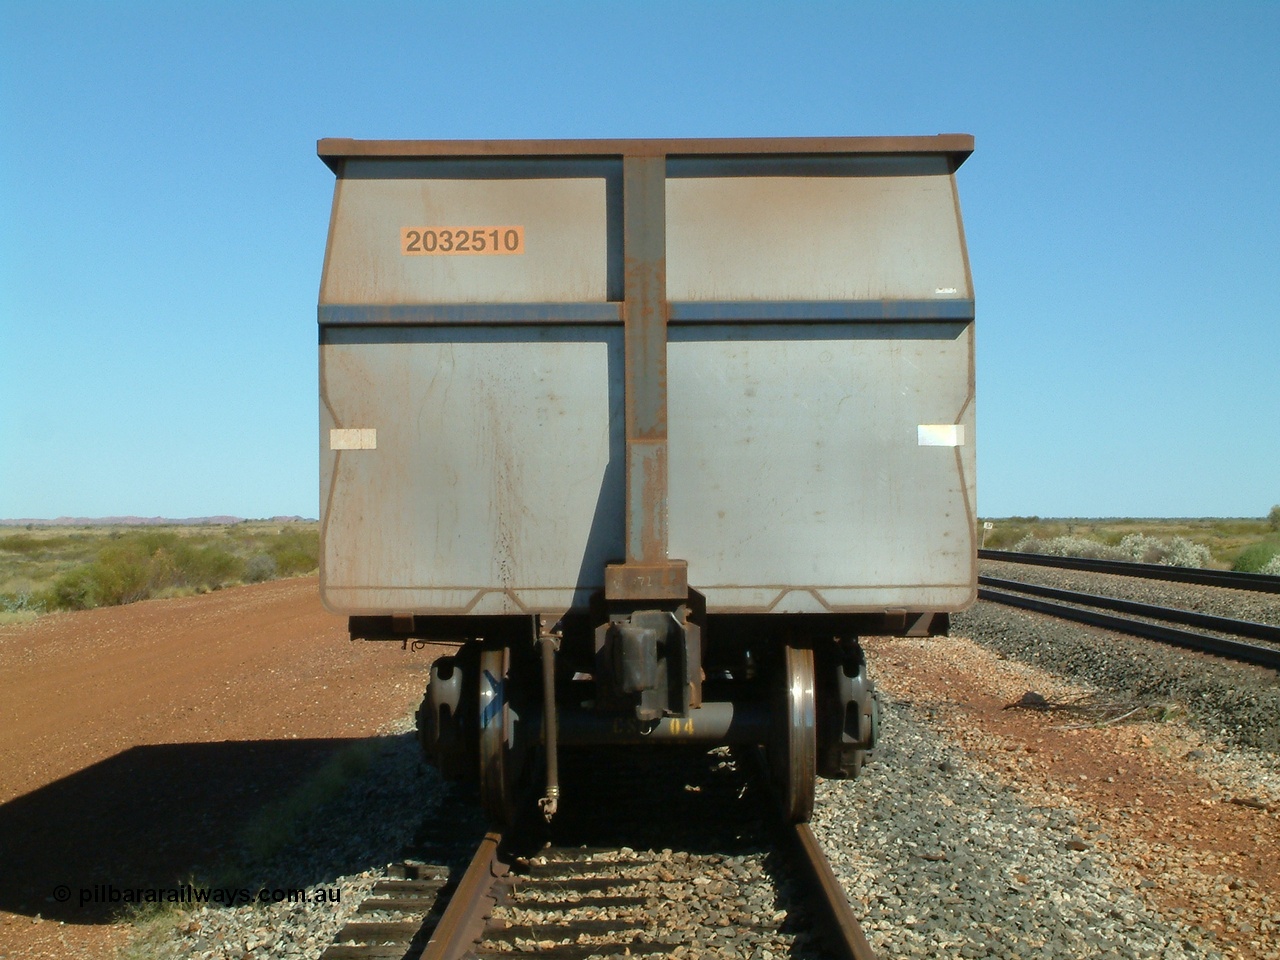 040801 144038
Walla Siding, Goninan built, Lynx Engineering designed ore waggon 4403 made from 5Cr12Ti stainless steel these waggons are known as Golynx waggons, asset number 203510 with serial 950124-004 and build date 02/2004. 1st August 2004.
Keywords: 4403;Goninan-WA;Golynx;BHP-ore-waggon;